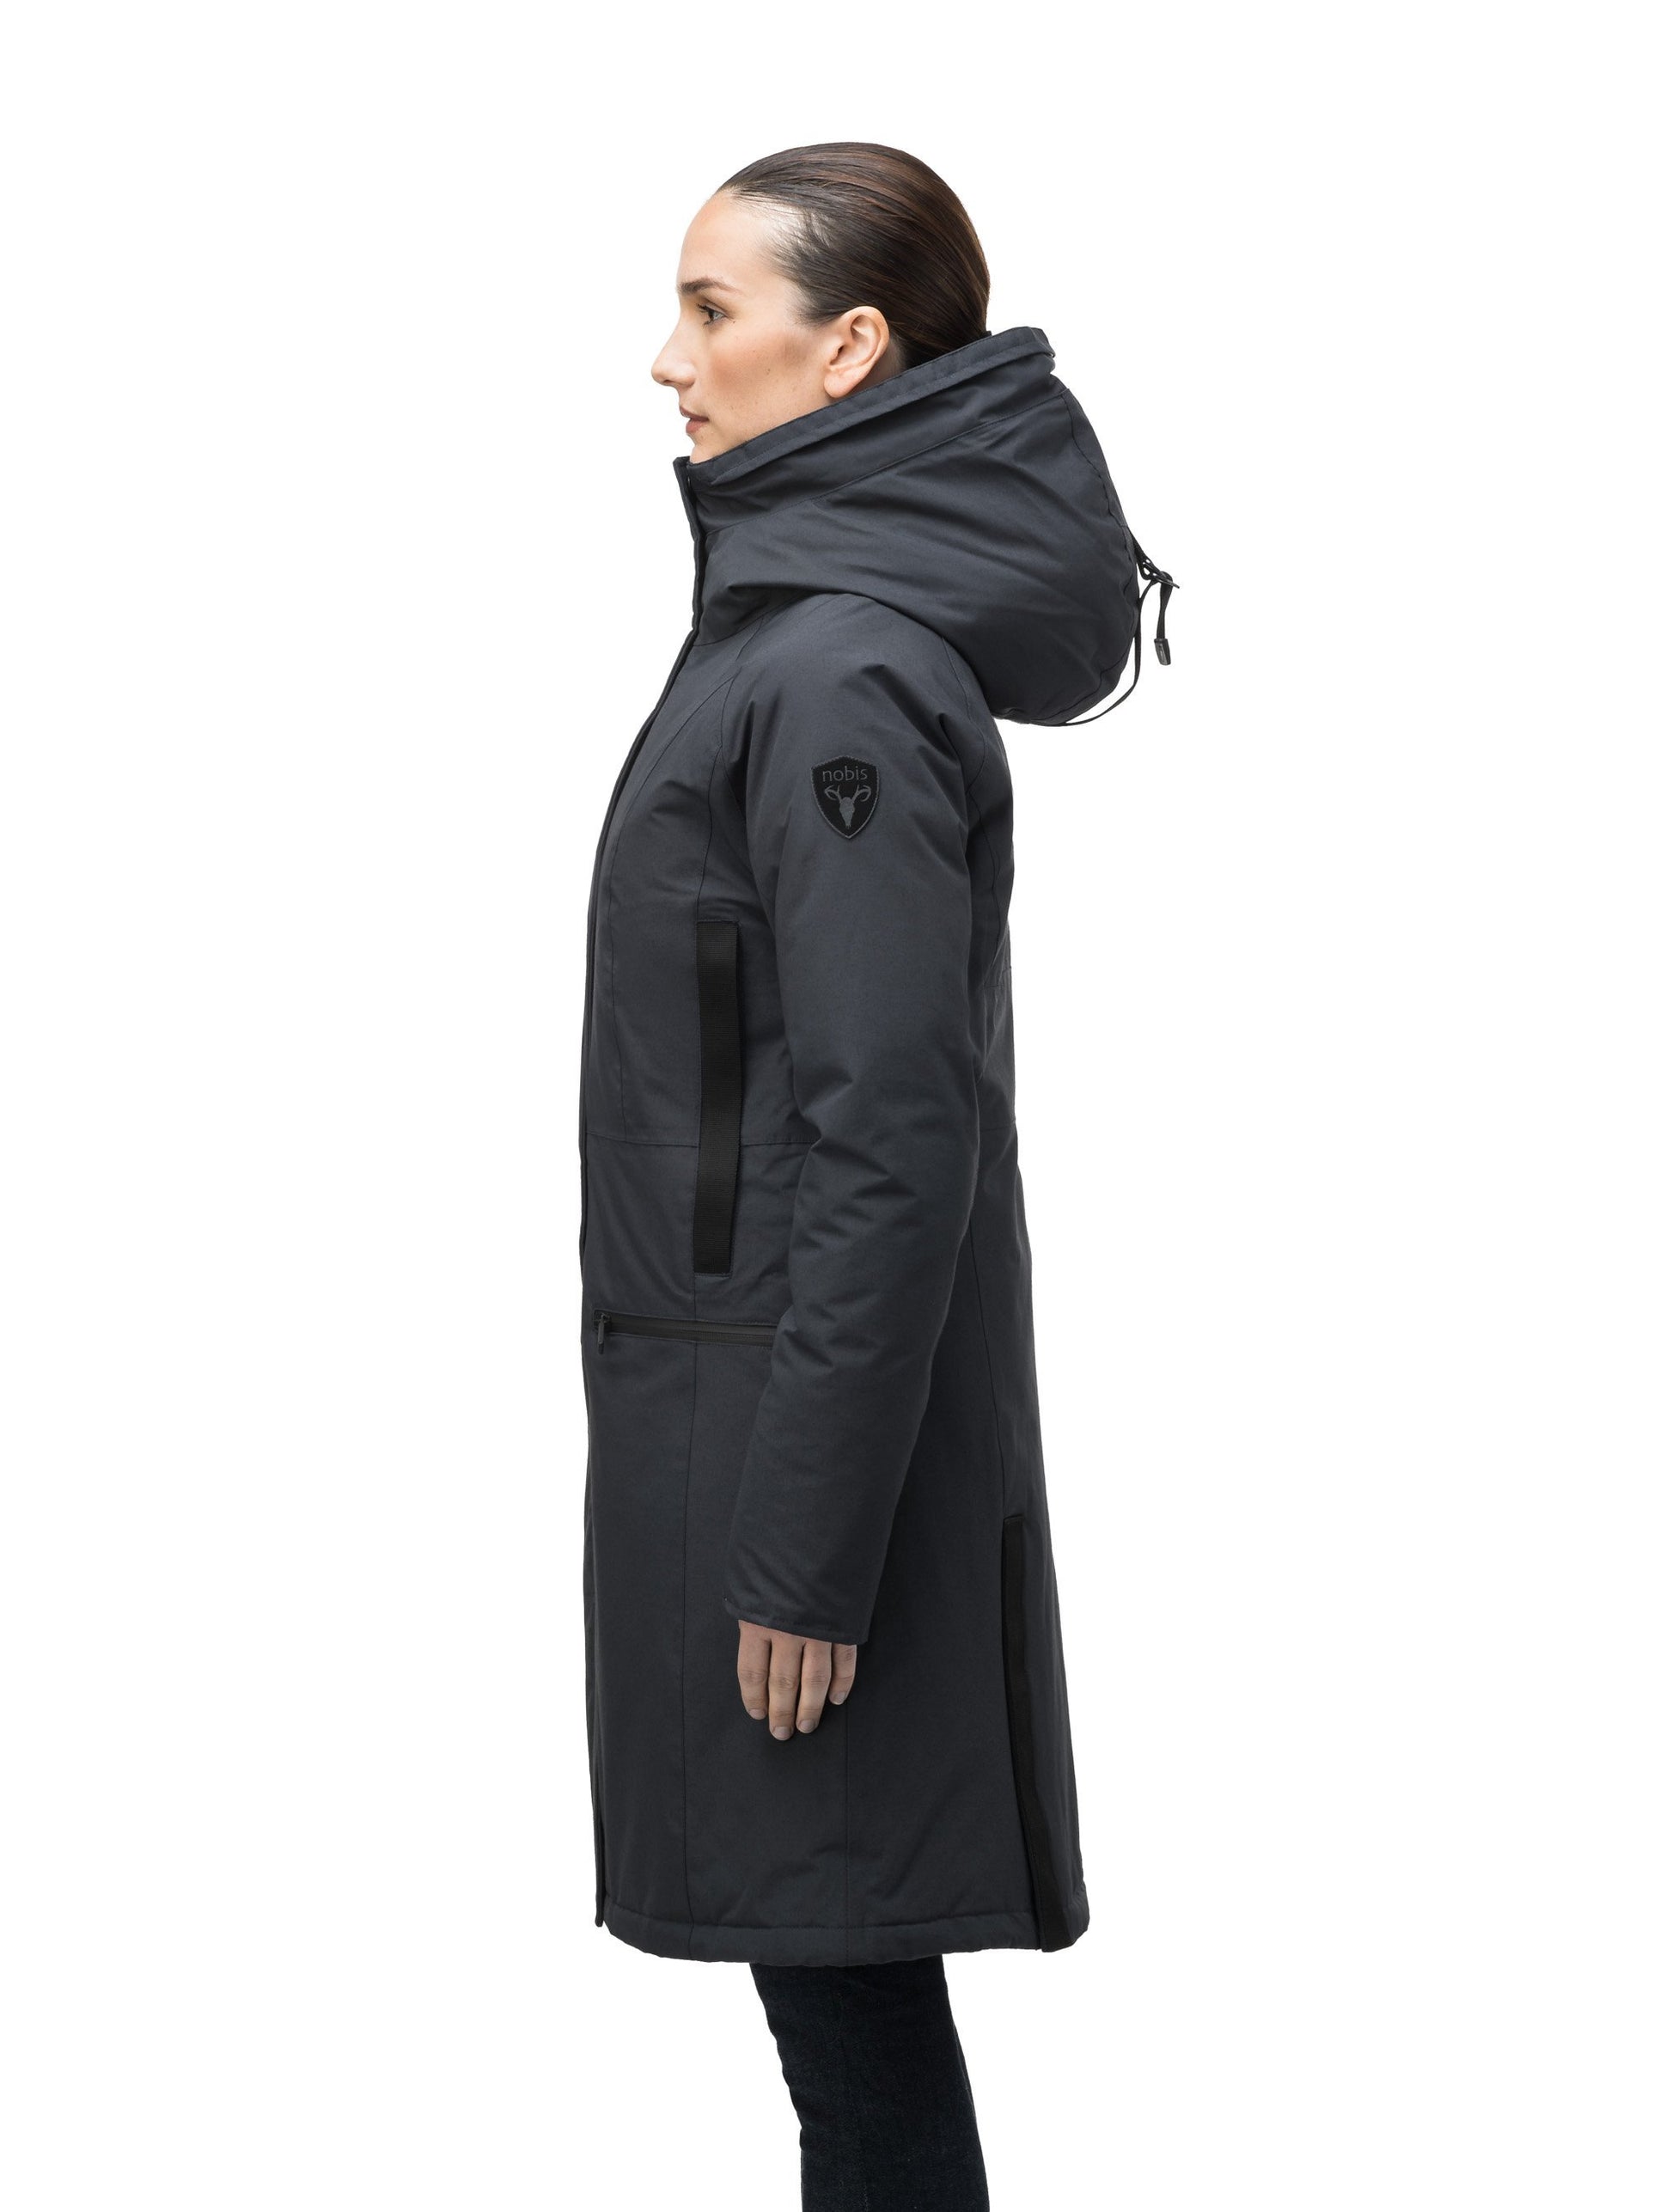 Knee length women's down filled parka with contrast ribbon accents and removable fur trim on the hood in Black